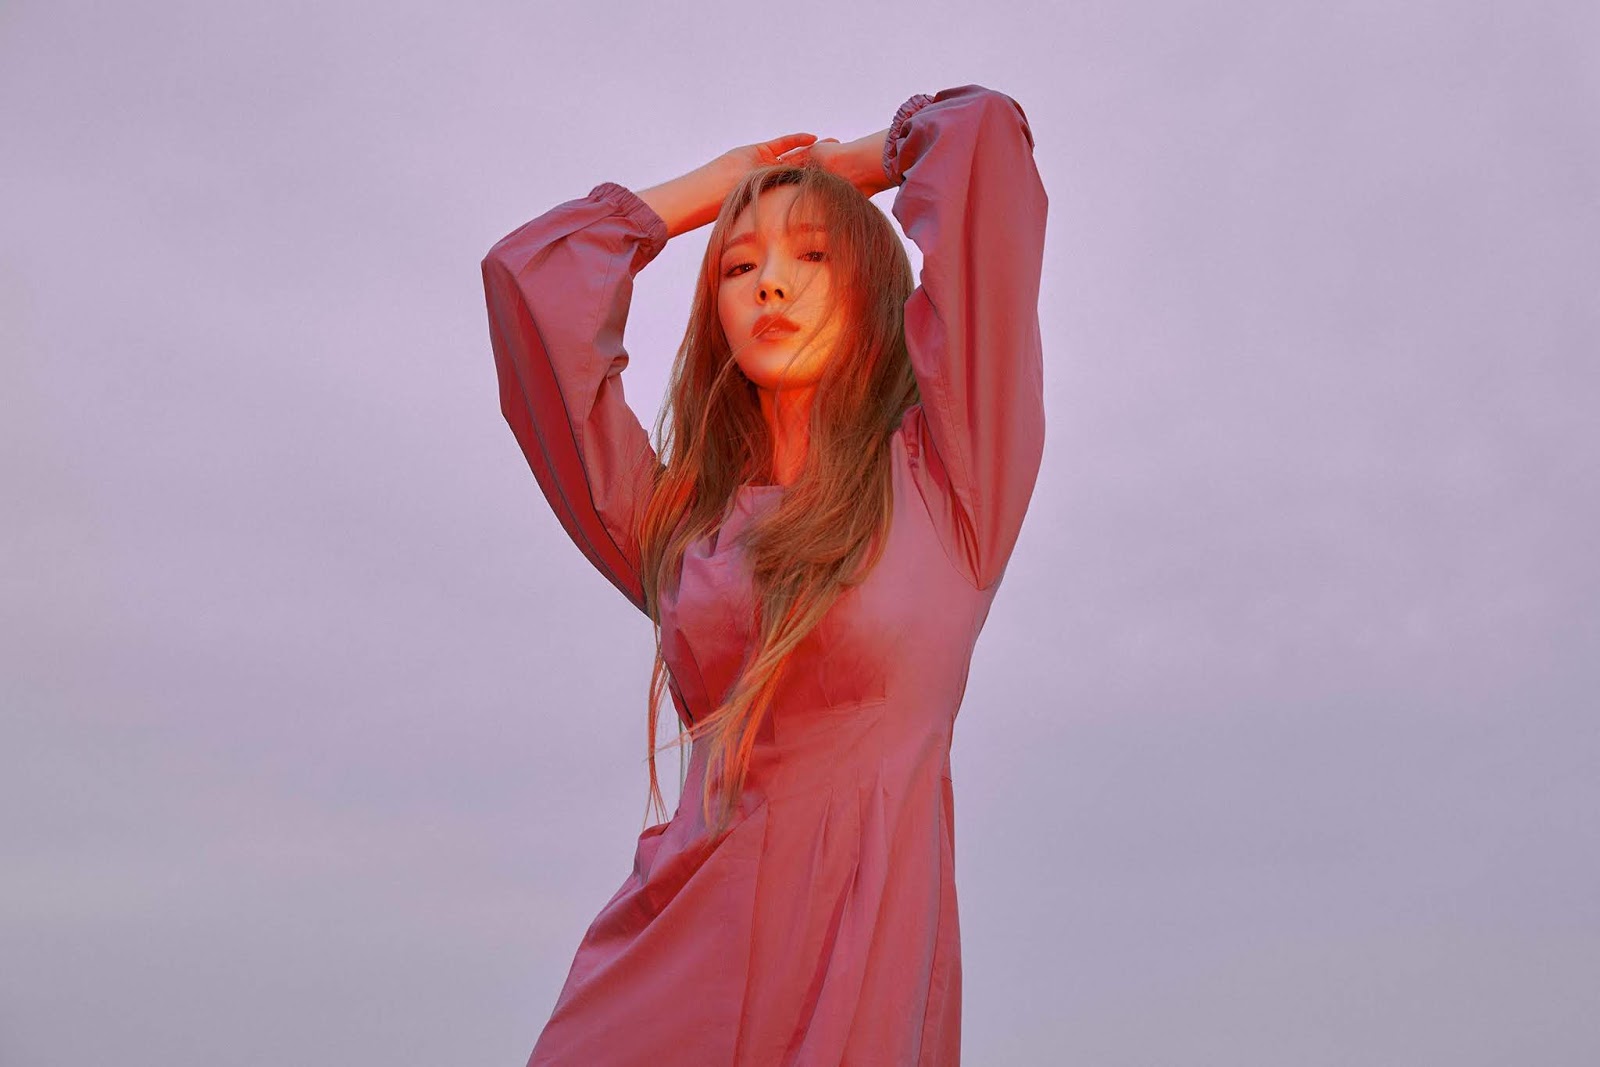 Taeyeon Becomes the First Female Solo Artist To Break This Record At Hanteo Through 'Purpose' Album